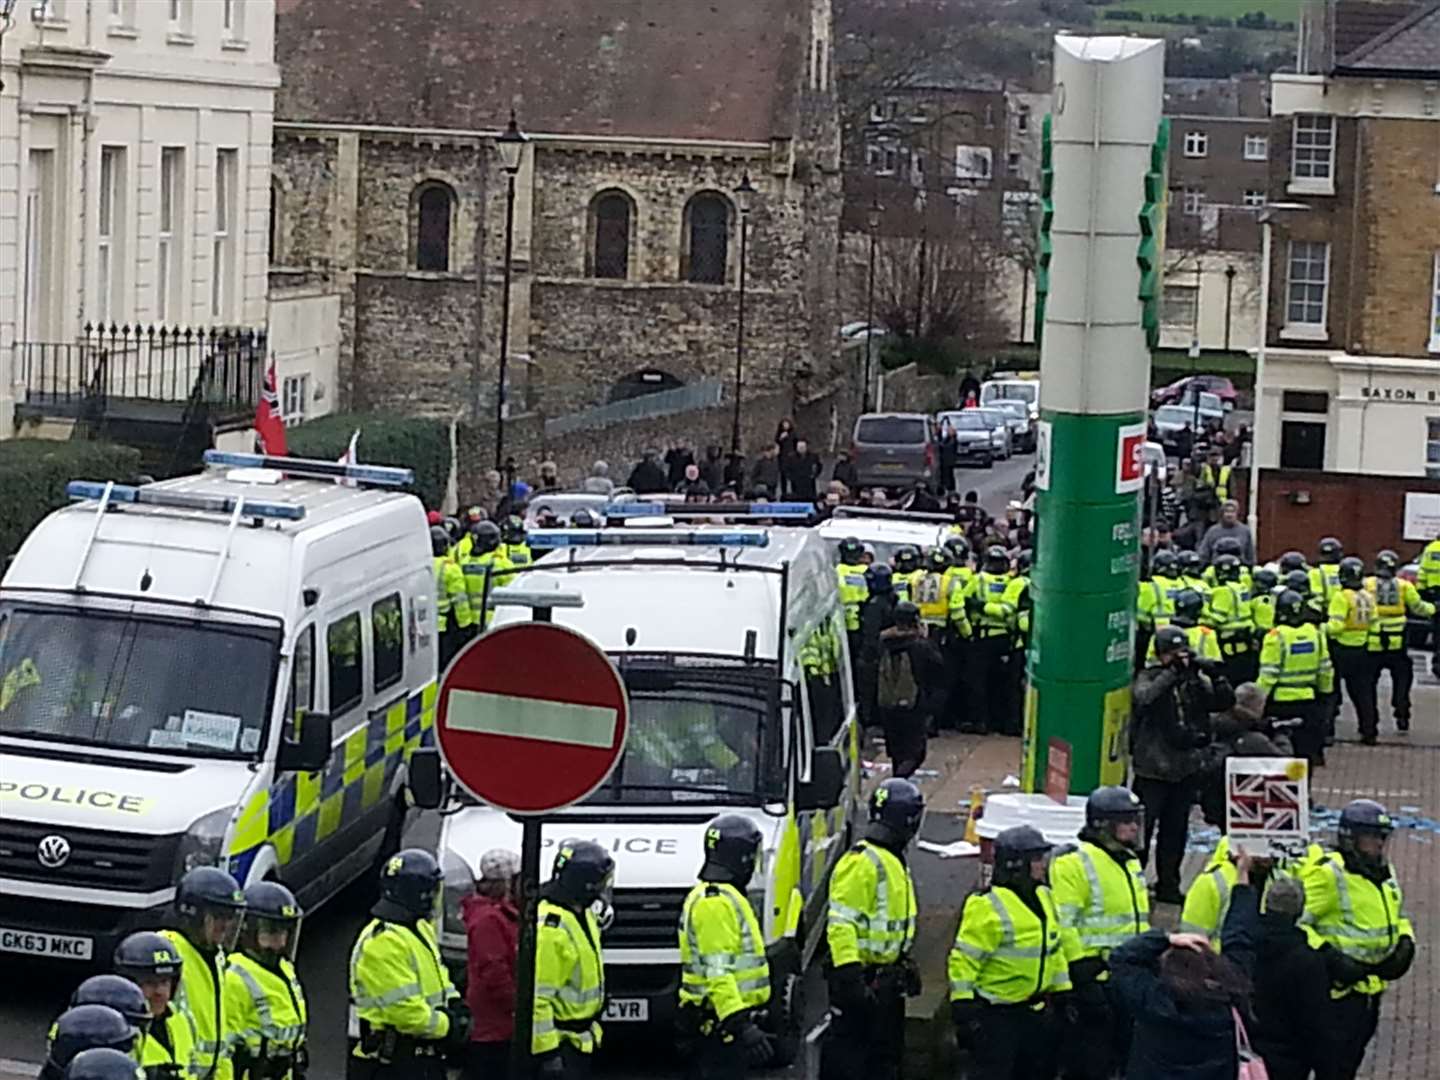 Police and protesters at Effingham Street in 2016, where stones were thrown by rioters from each end